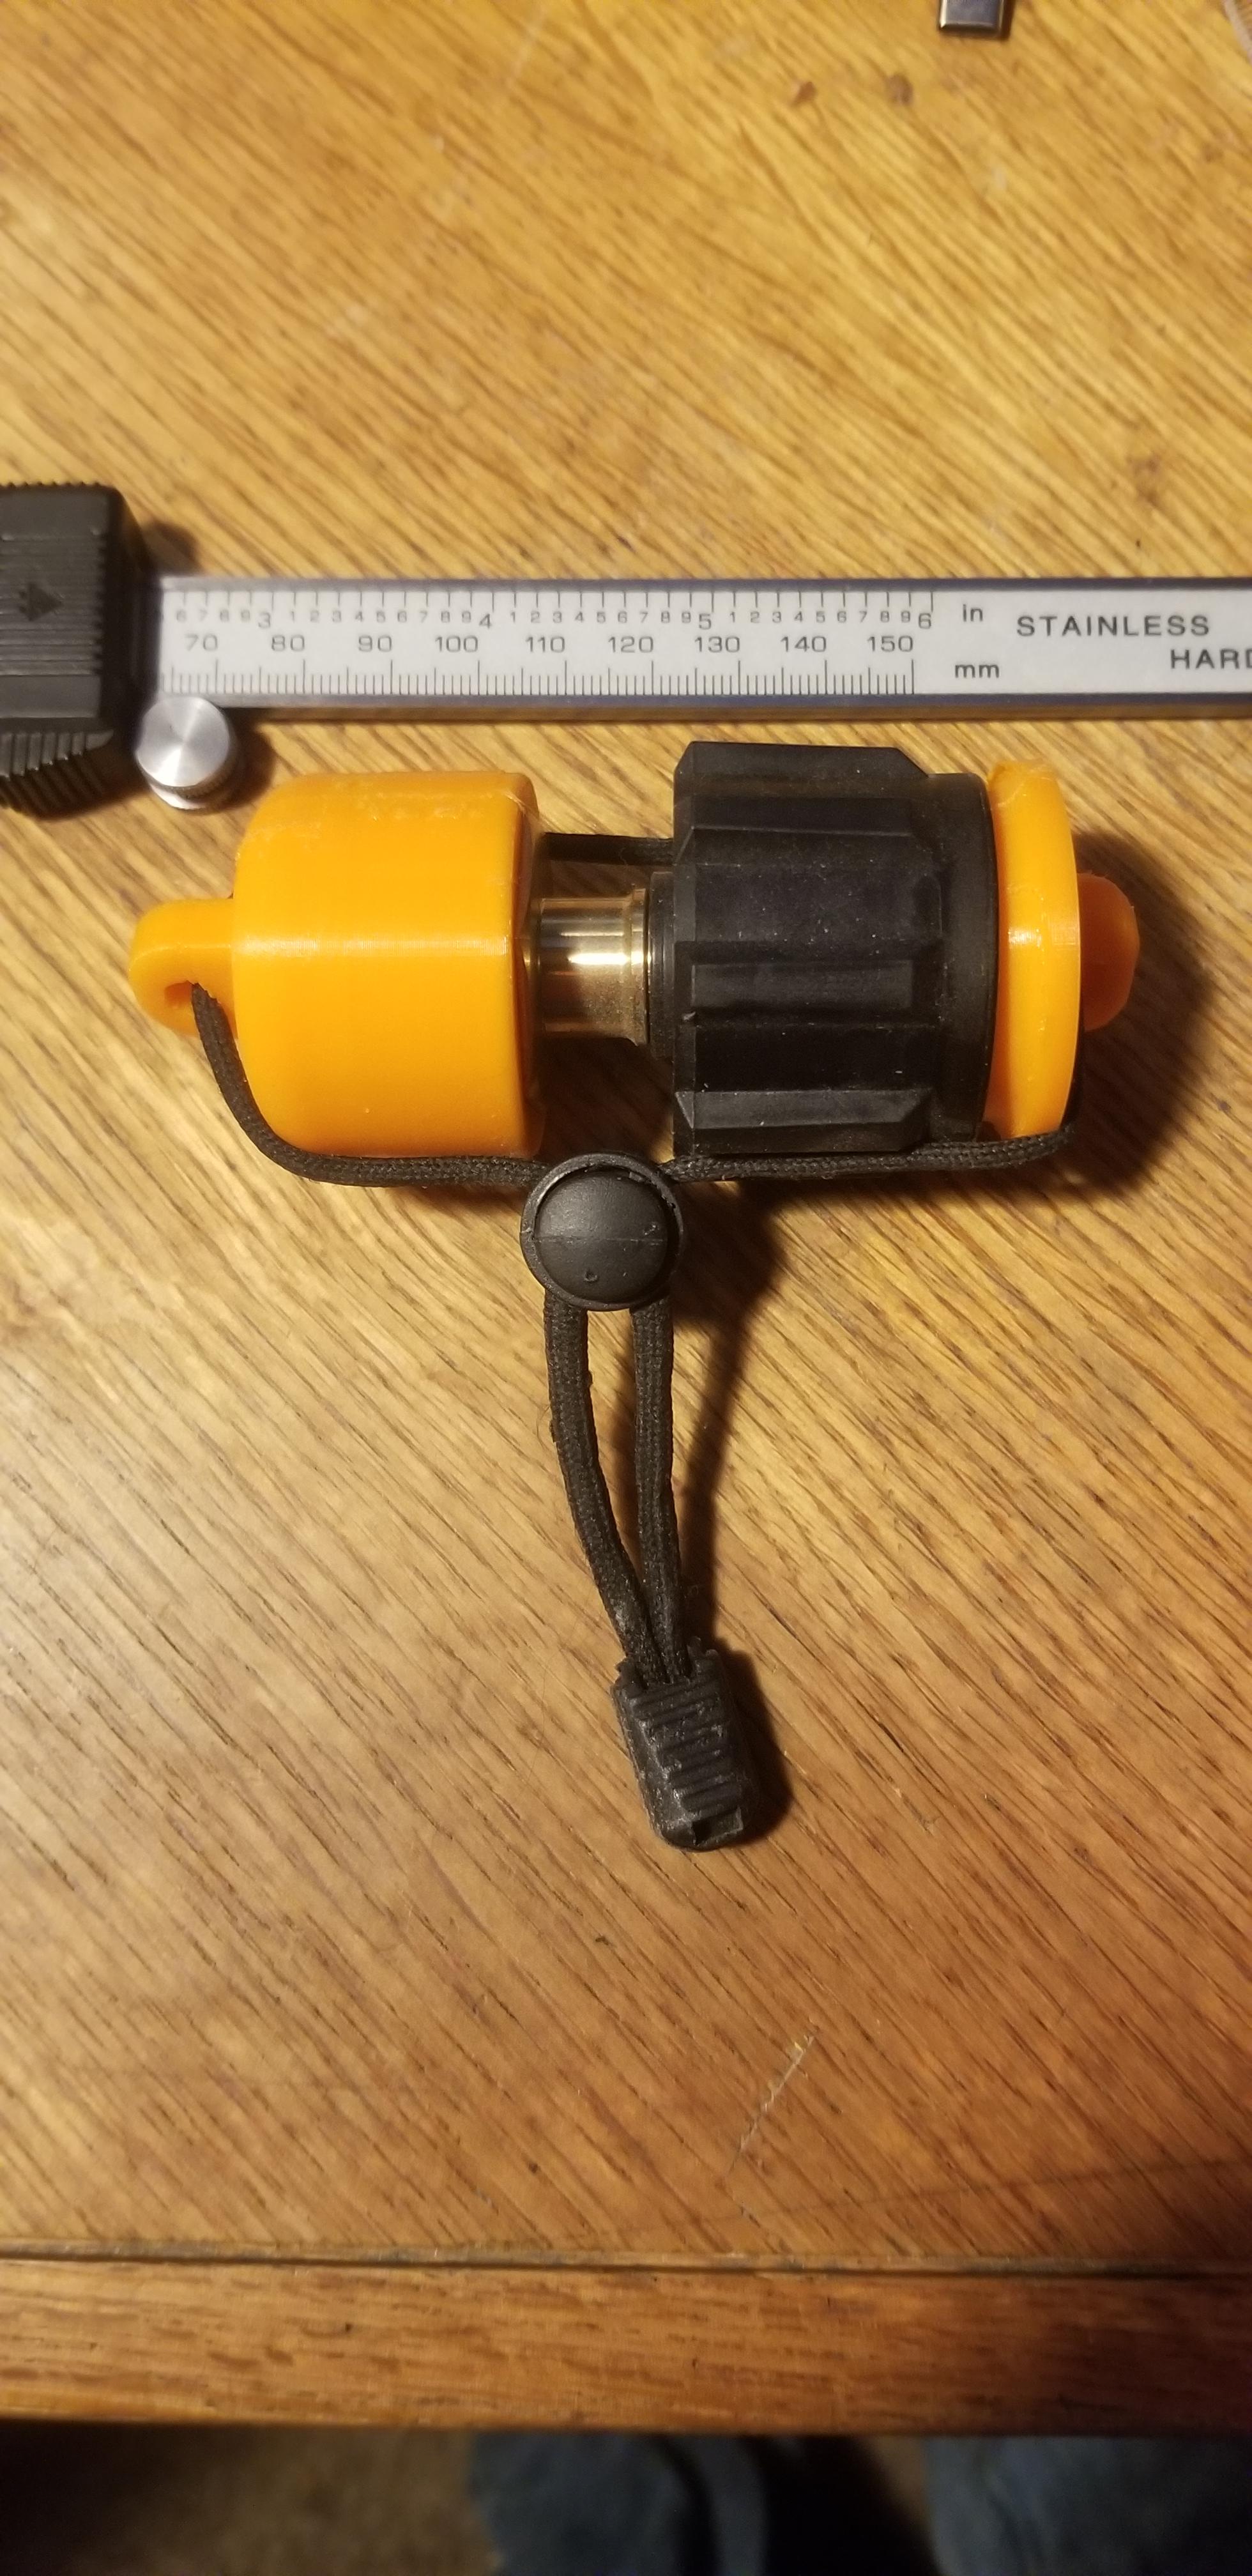 Cover for 20LB connector of 1LB to 20LB Adapter 3d model